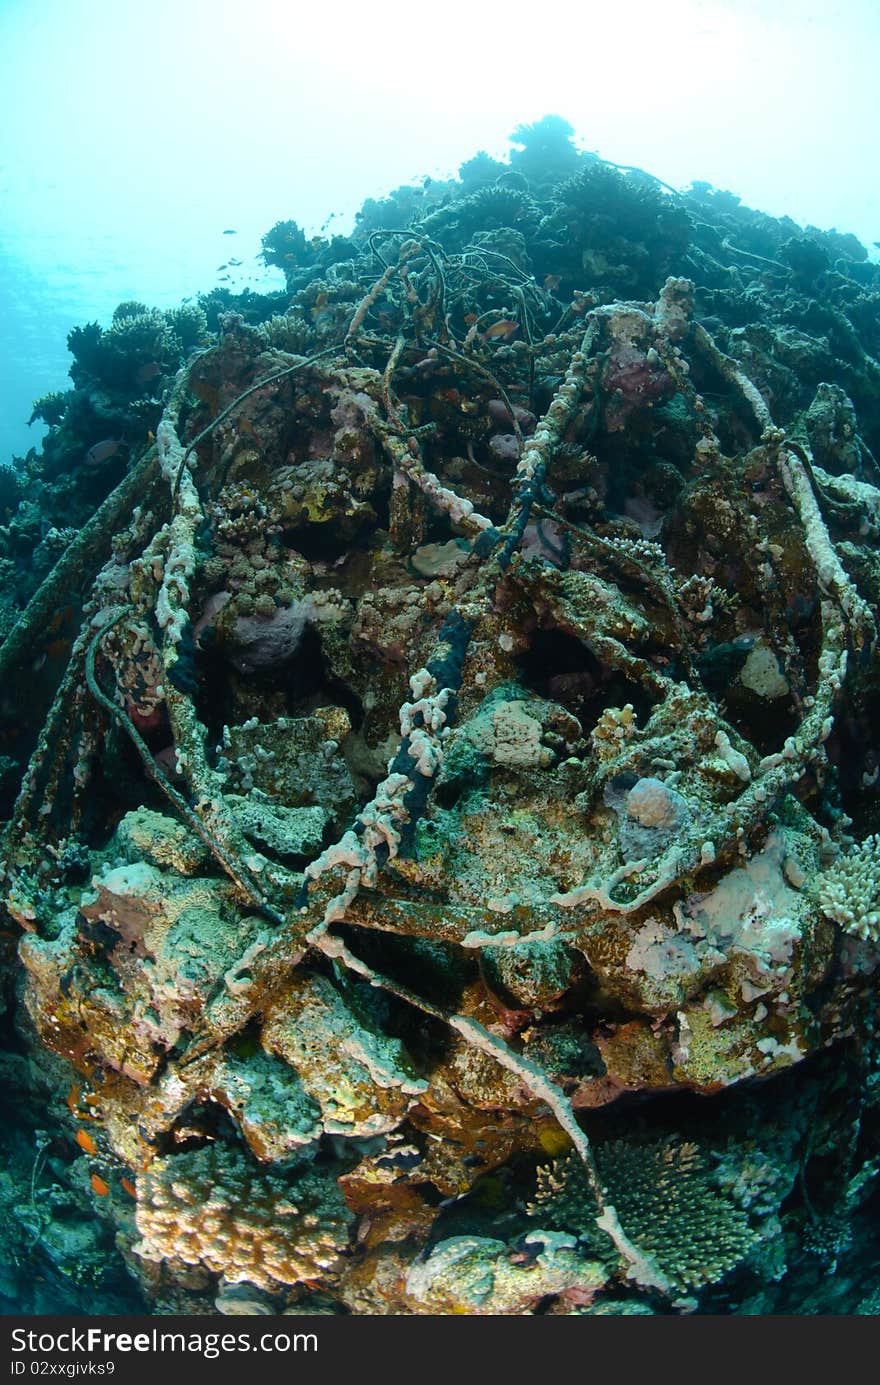 Wreckage from the shipwreck SS Lara which struck Jackson reef, situated in the Straits of Tiran in 1982. Jackson Reef, Red Sea, Egypt. Wreckage from the shipwreck SS Lara which struck Jackson reef, situated in the Straits of Tiran in 1982. Jackson Reef, Red Sea, Egypt.